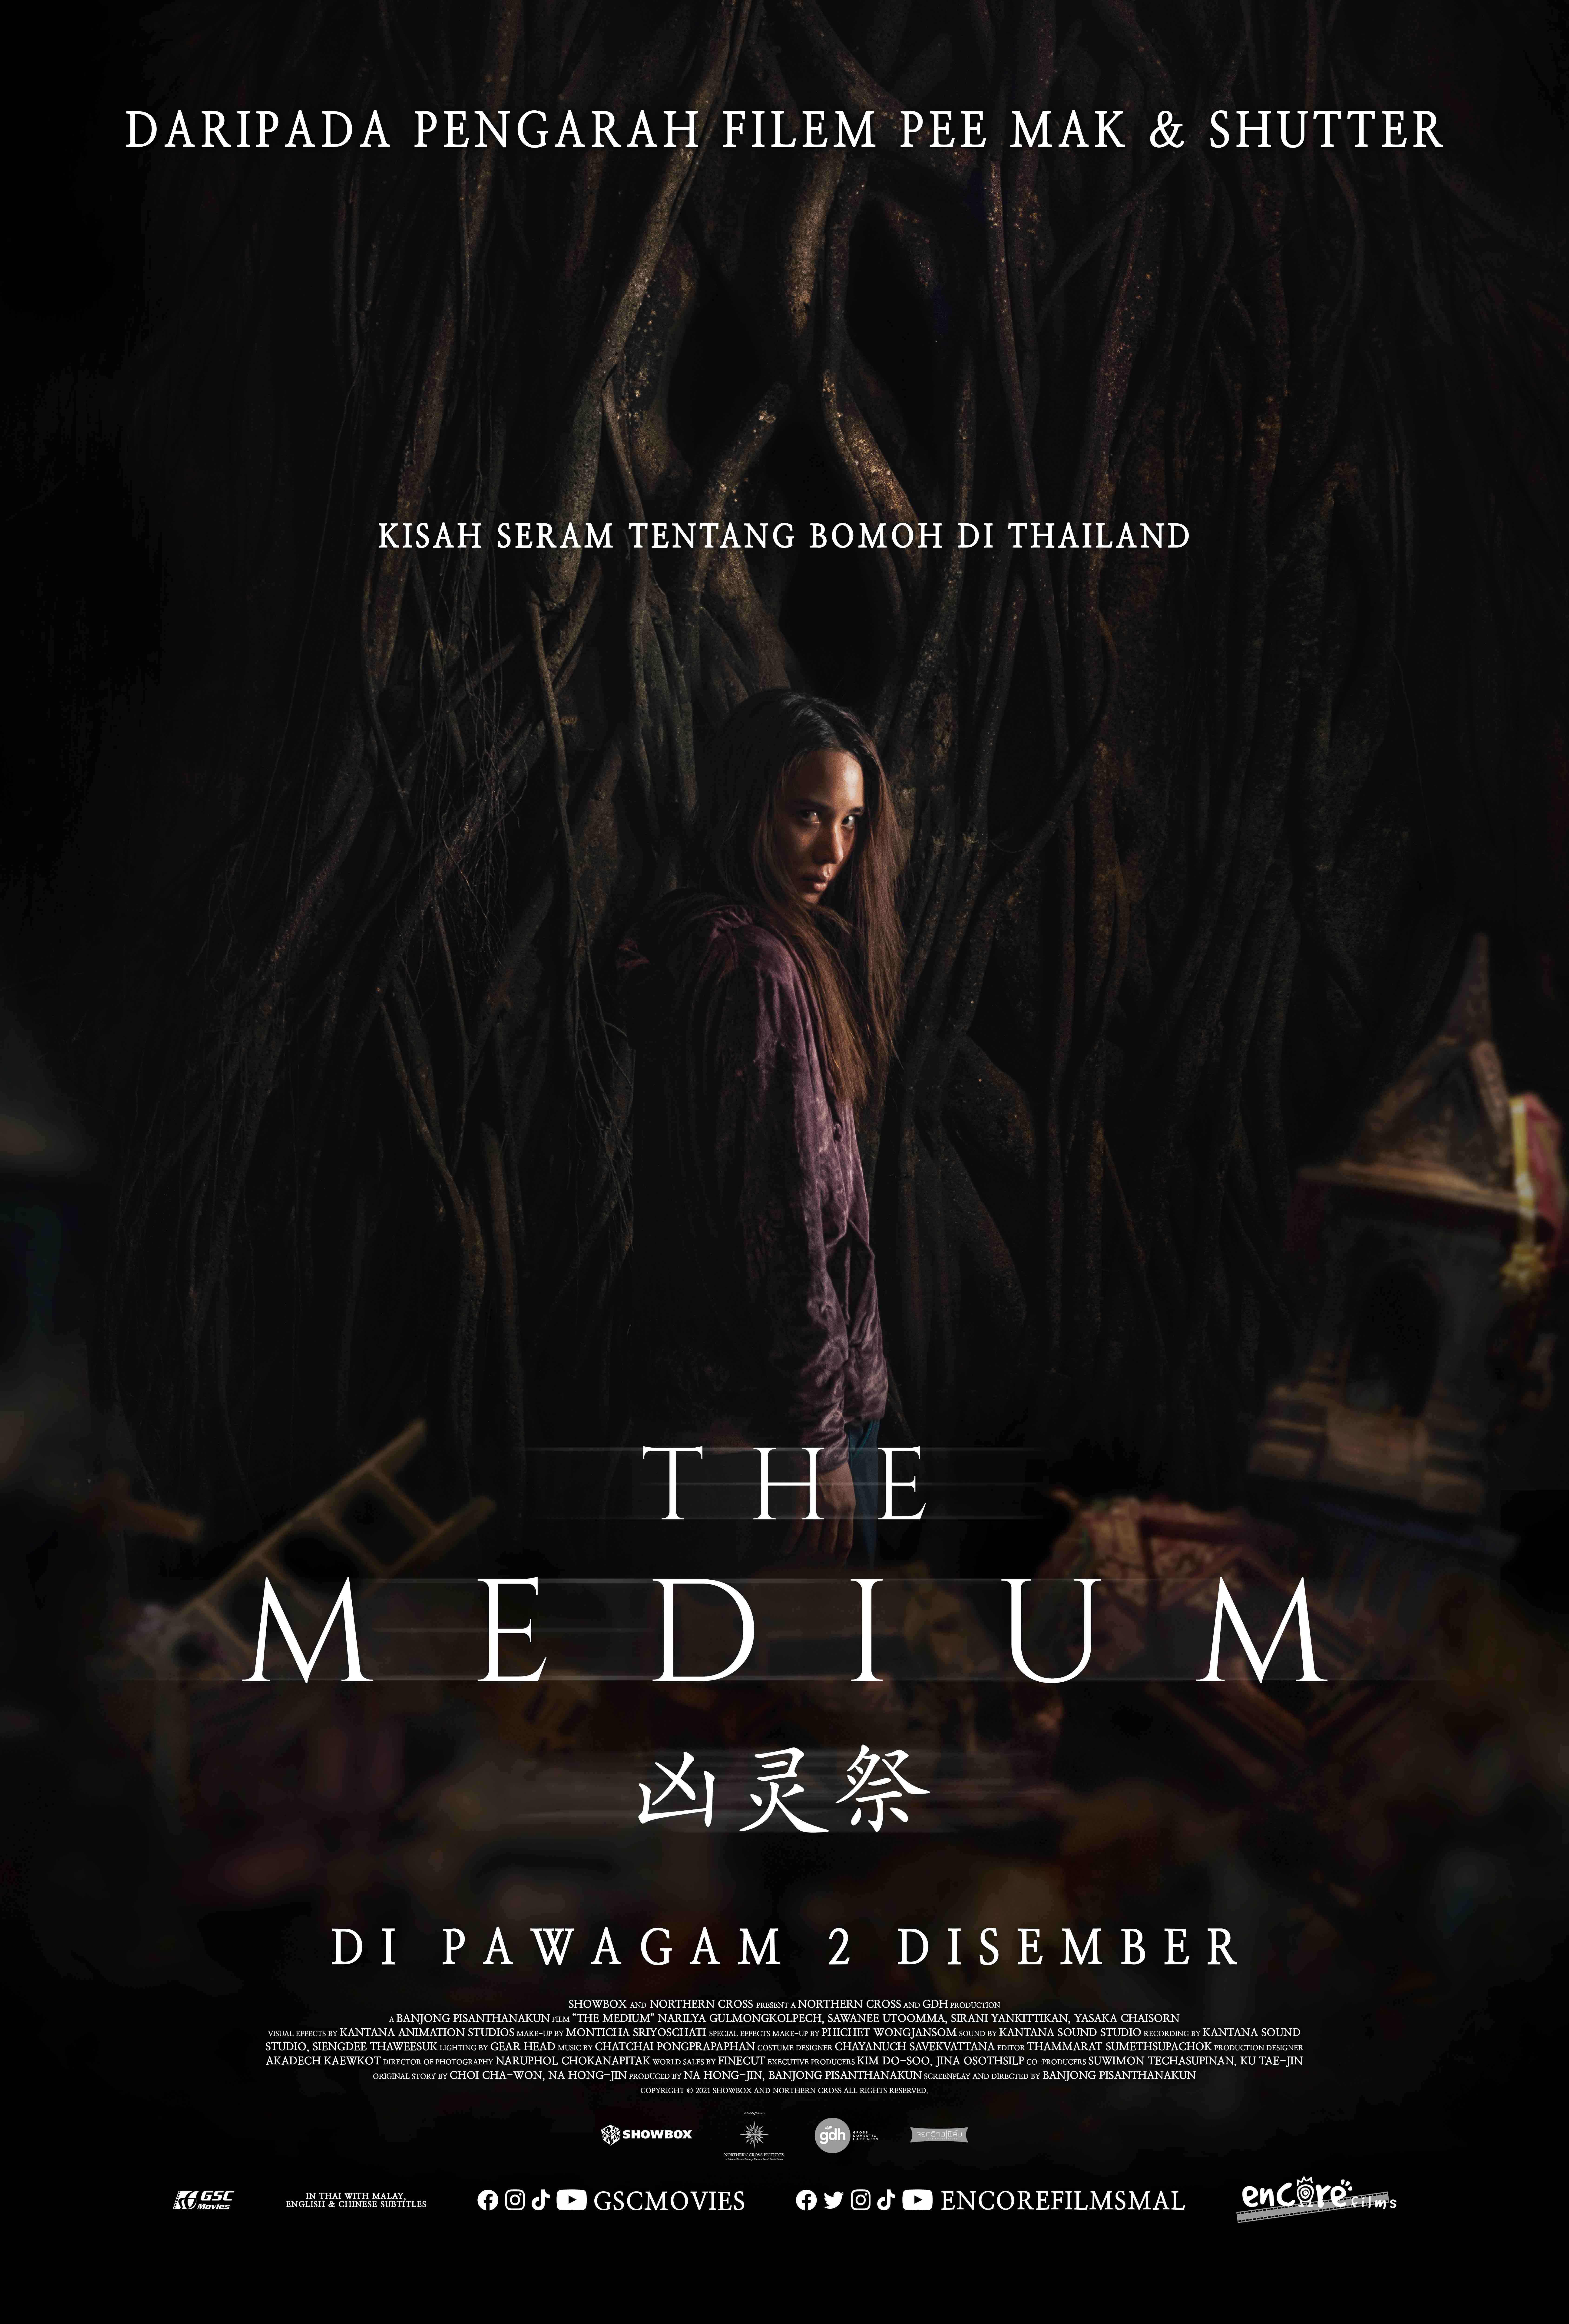 The Medium, A Movie to Make Your Blood Run Cold!